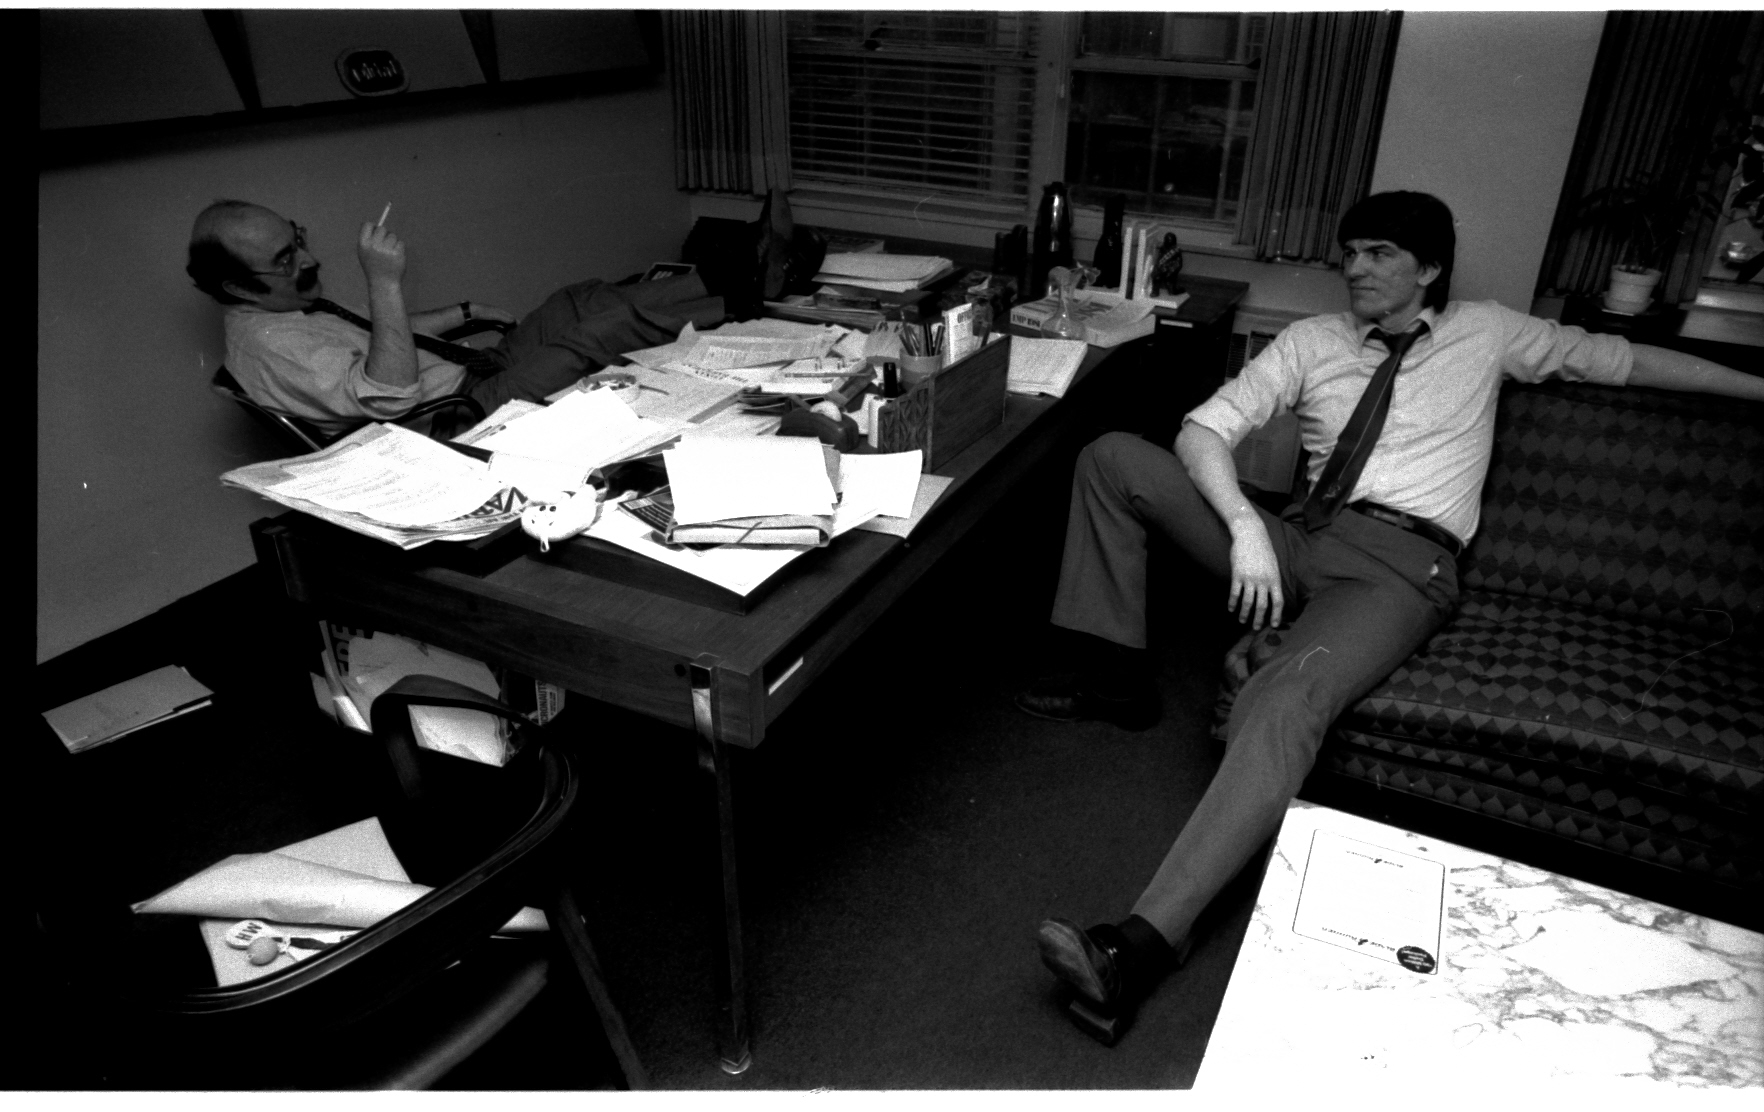 The calm after the storm. A peaceful moment between Mike Hobson and Jim Shooter in Mike's spacious corner office. That damned couch has been at Marvel since I was a downy-cheeked messenger boy-- turning up in Stan's offices like a bad penny, year in, year out. Mike must've lost a bet to have gotten that couch. I'm pretty sure it did not survive the trip downtown...